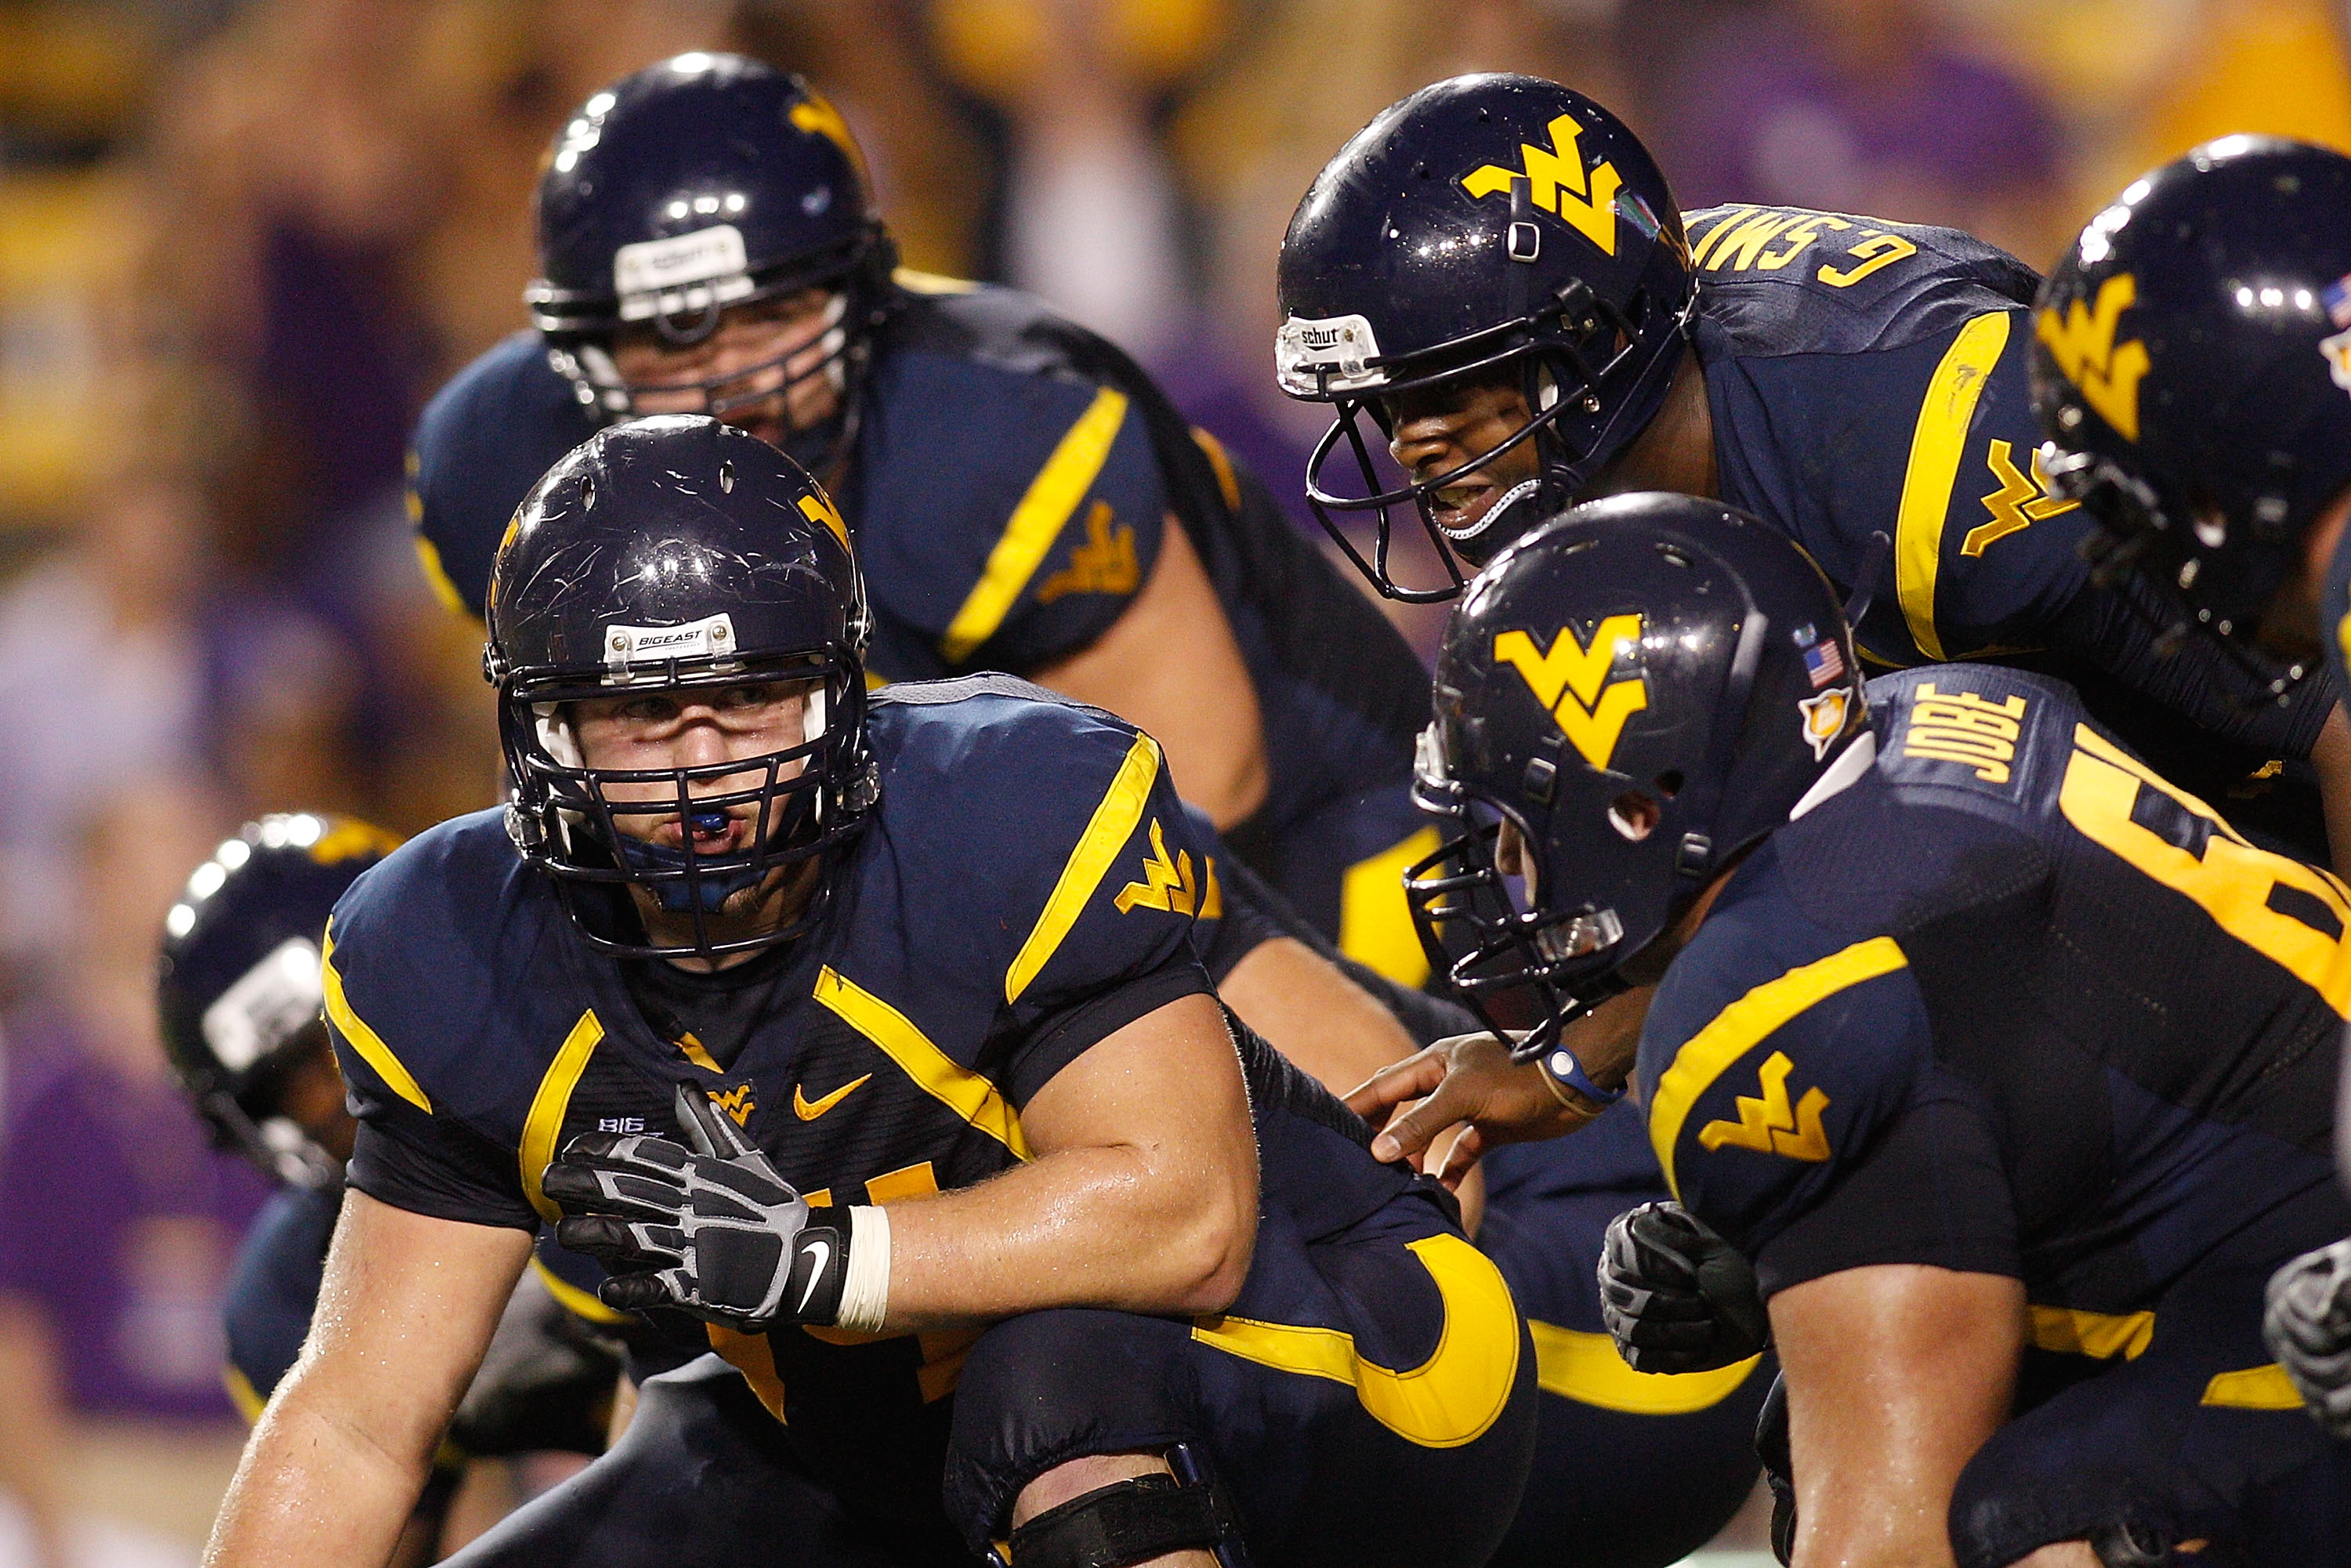 The 20 Worst College Football Uniforms: There's More Than One Ugly